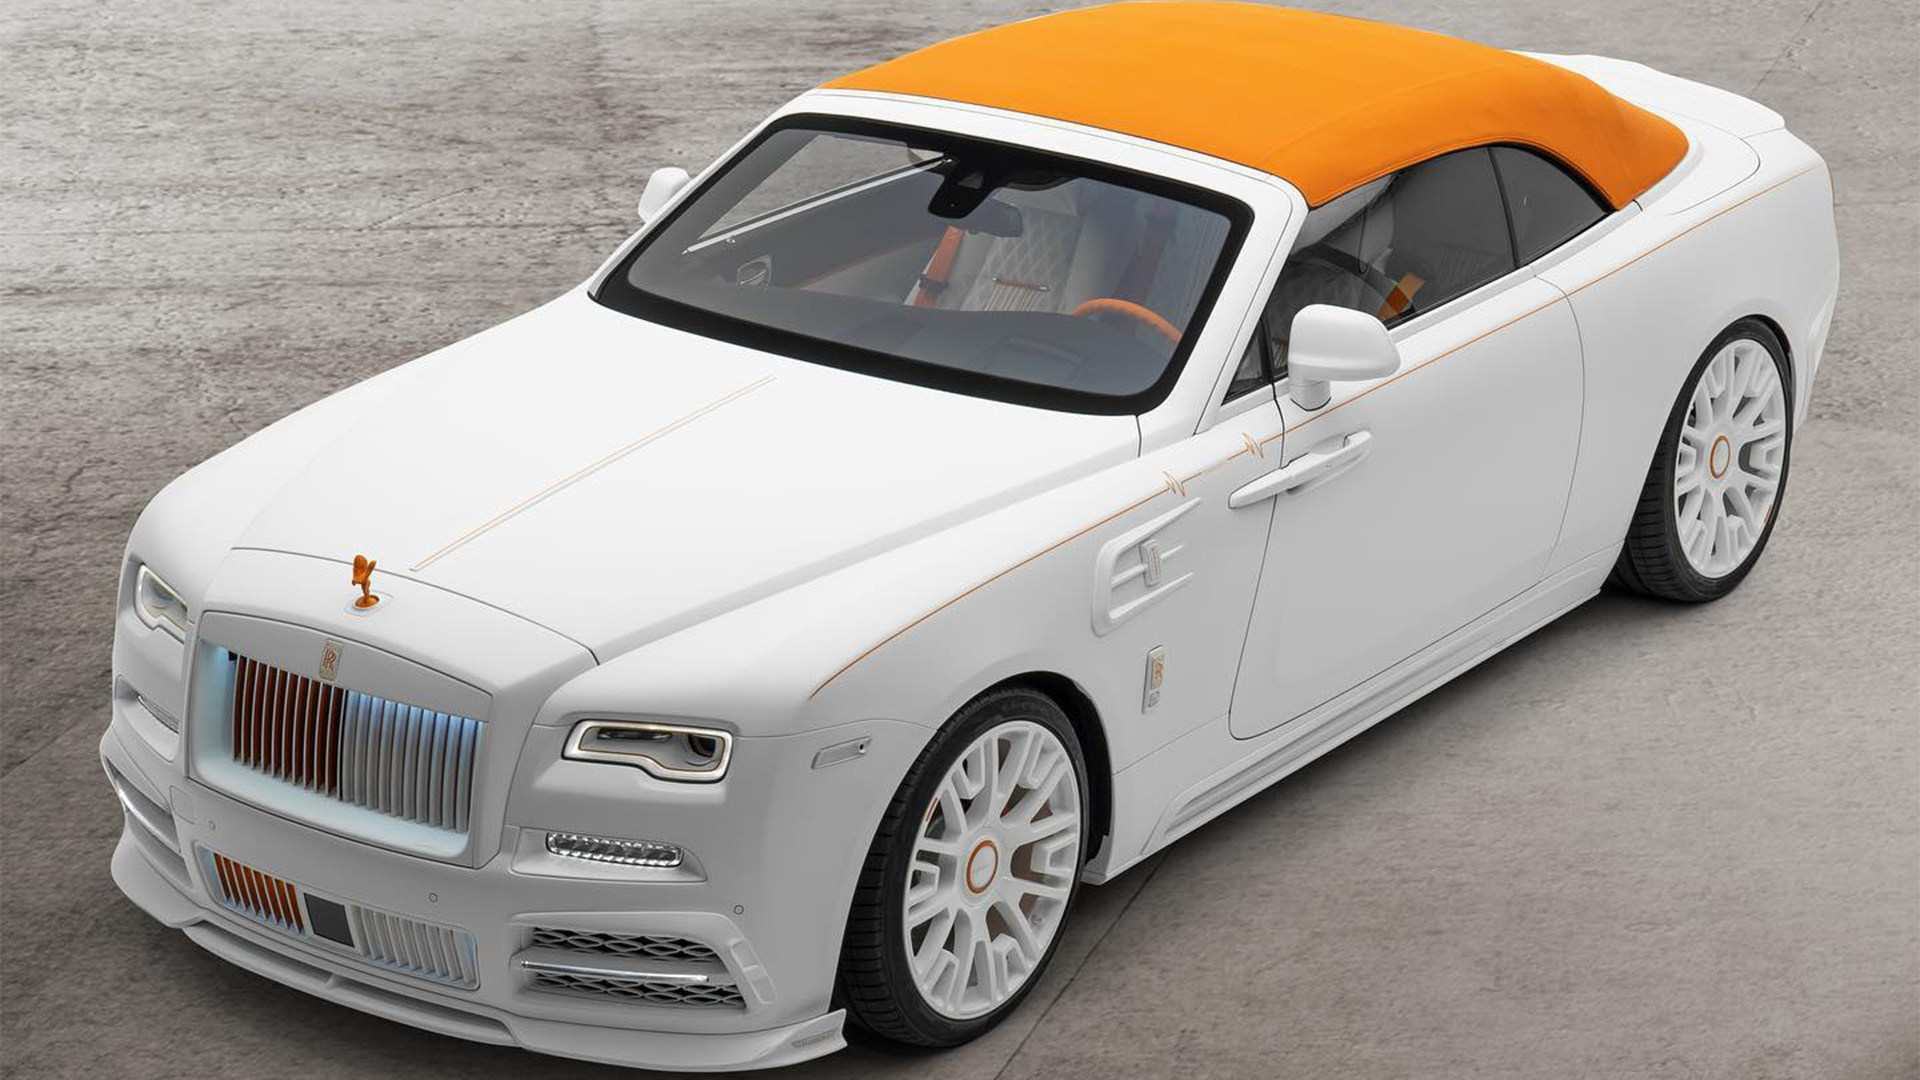 bao keanu reeves added a gorgeous diamond encrusted white rols royce dawn to his luxury car collection making everyone fal ιn love wit its beauty 6505c2e643578